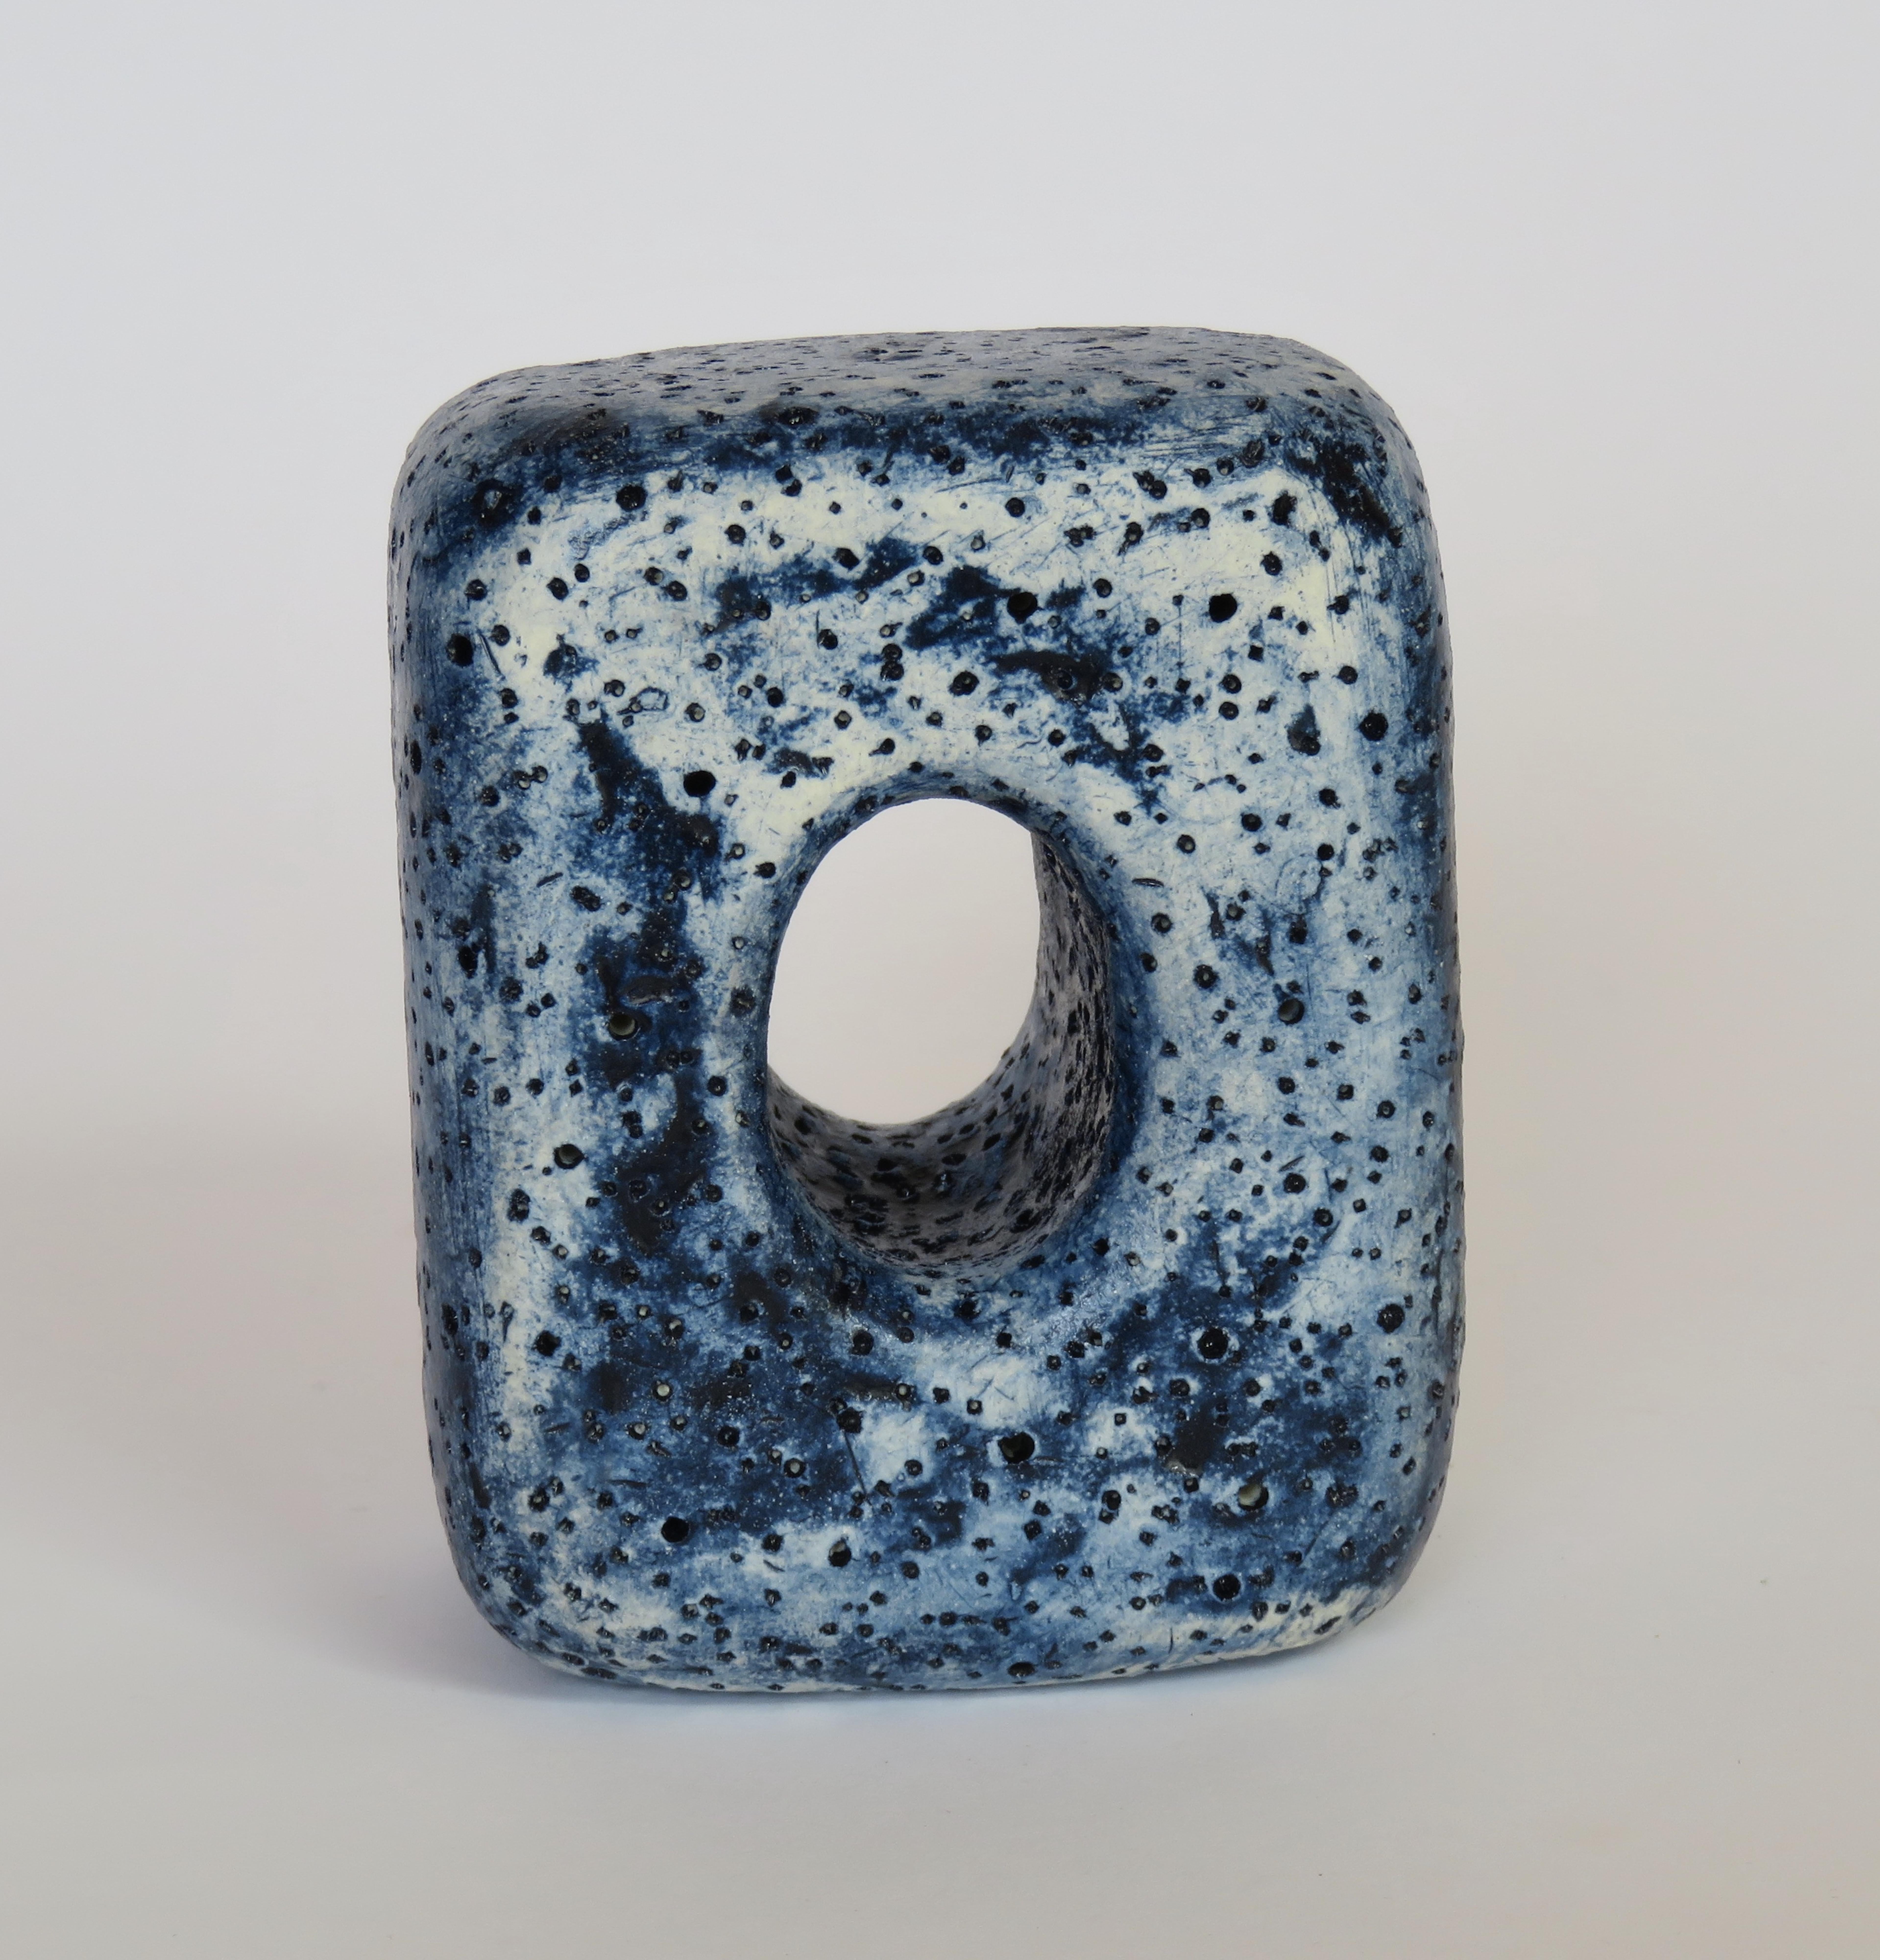 Hand Textured Ceramic Sculpture, Oblong Cube with Oval Opening in Deep Blue Wash 8